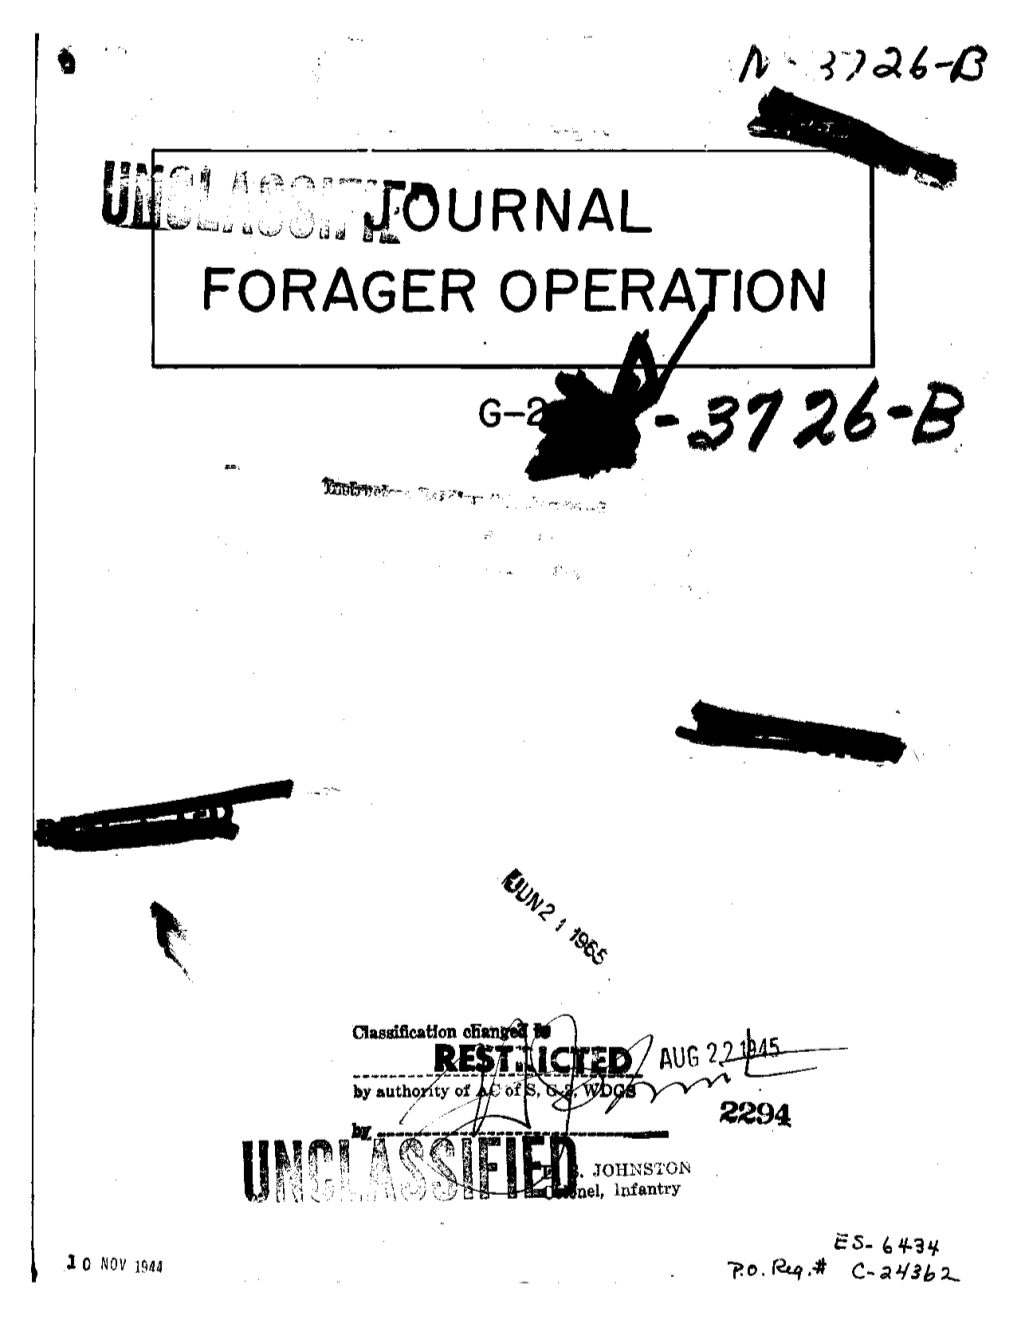 ^^. Journal Forager Operation